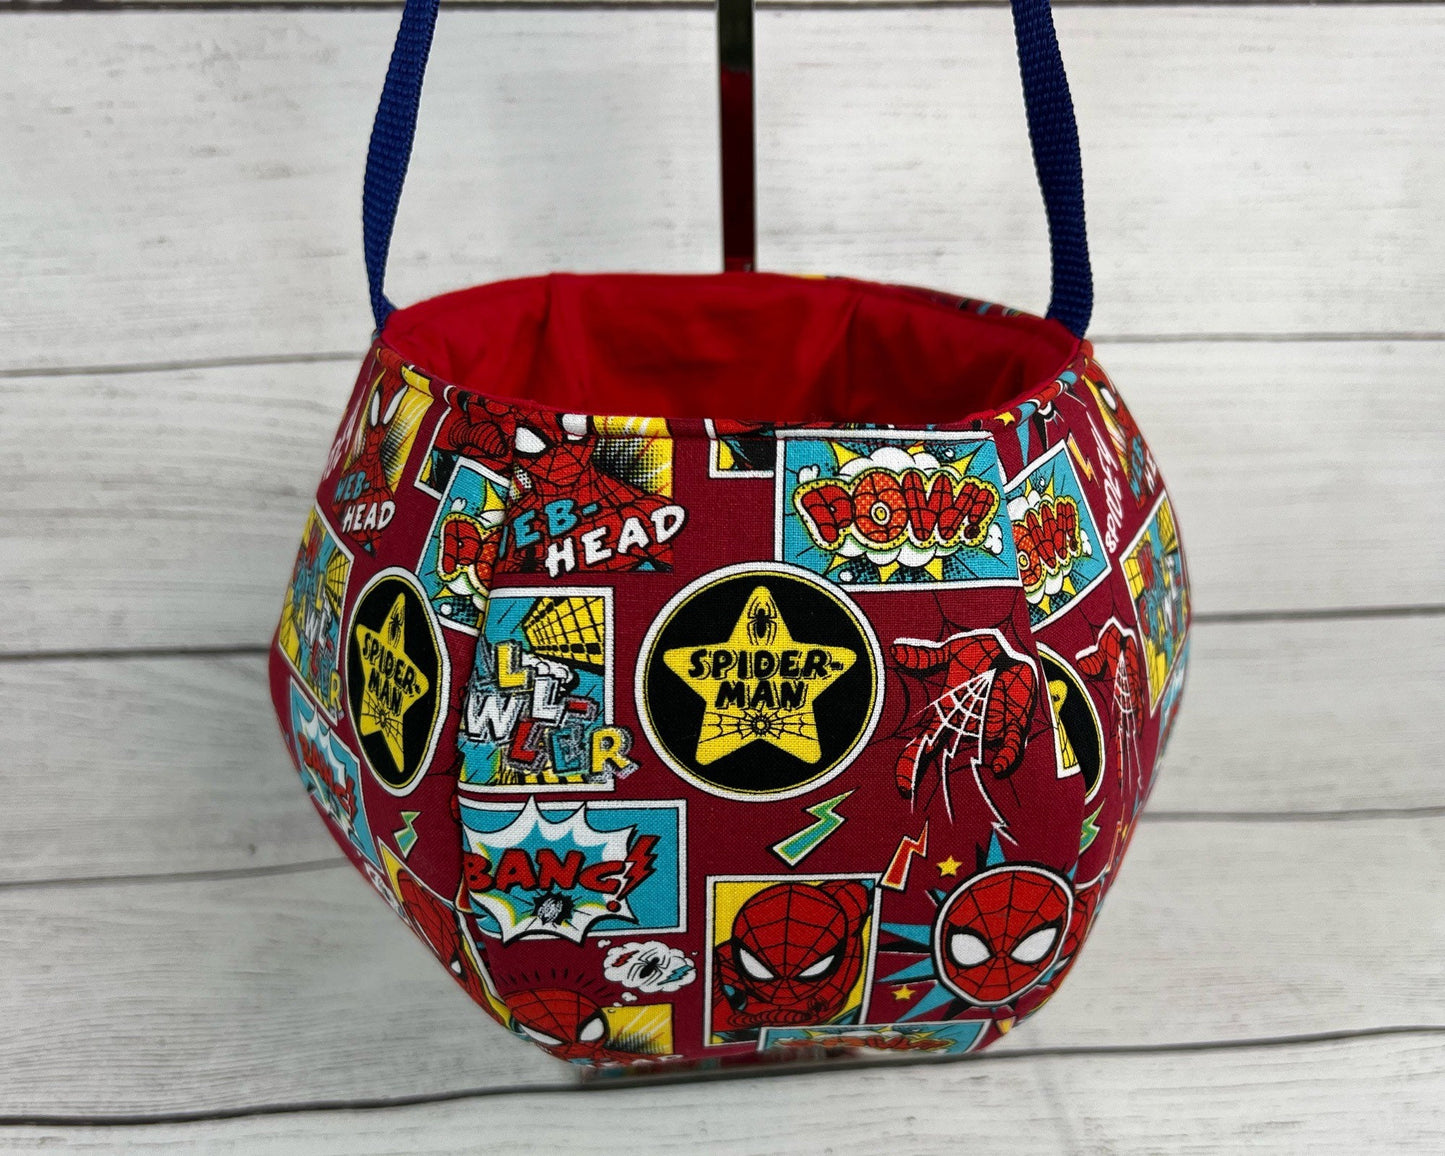 Spider-Man Handmade Tote Bag - Bag - Tote - Spider-Man - Web - Marvel - Everyday - Holiday - Gift - Easter - Halloween - Party